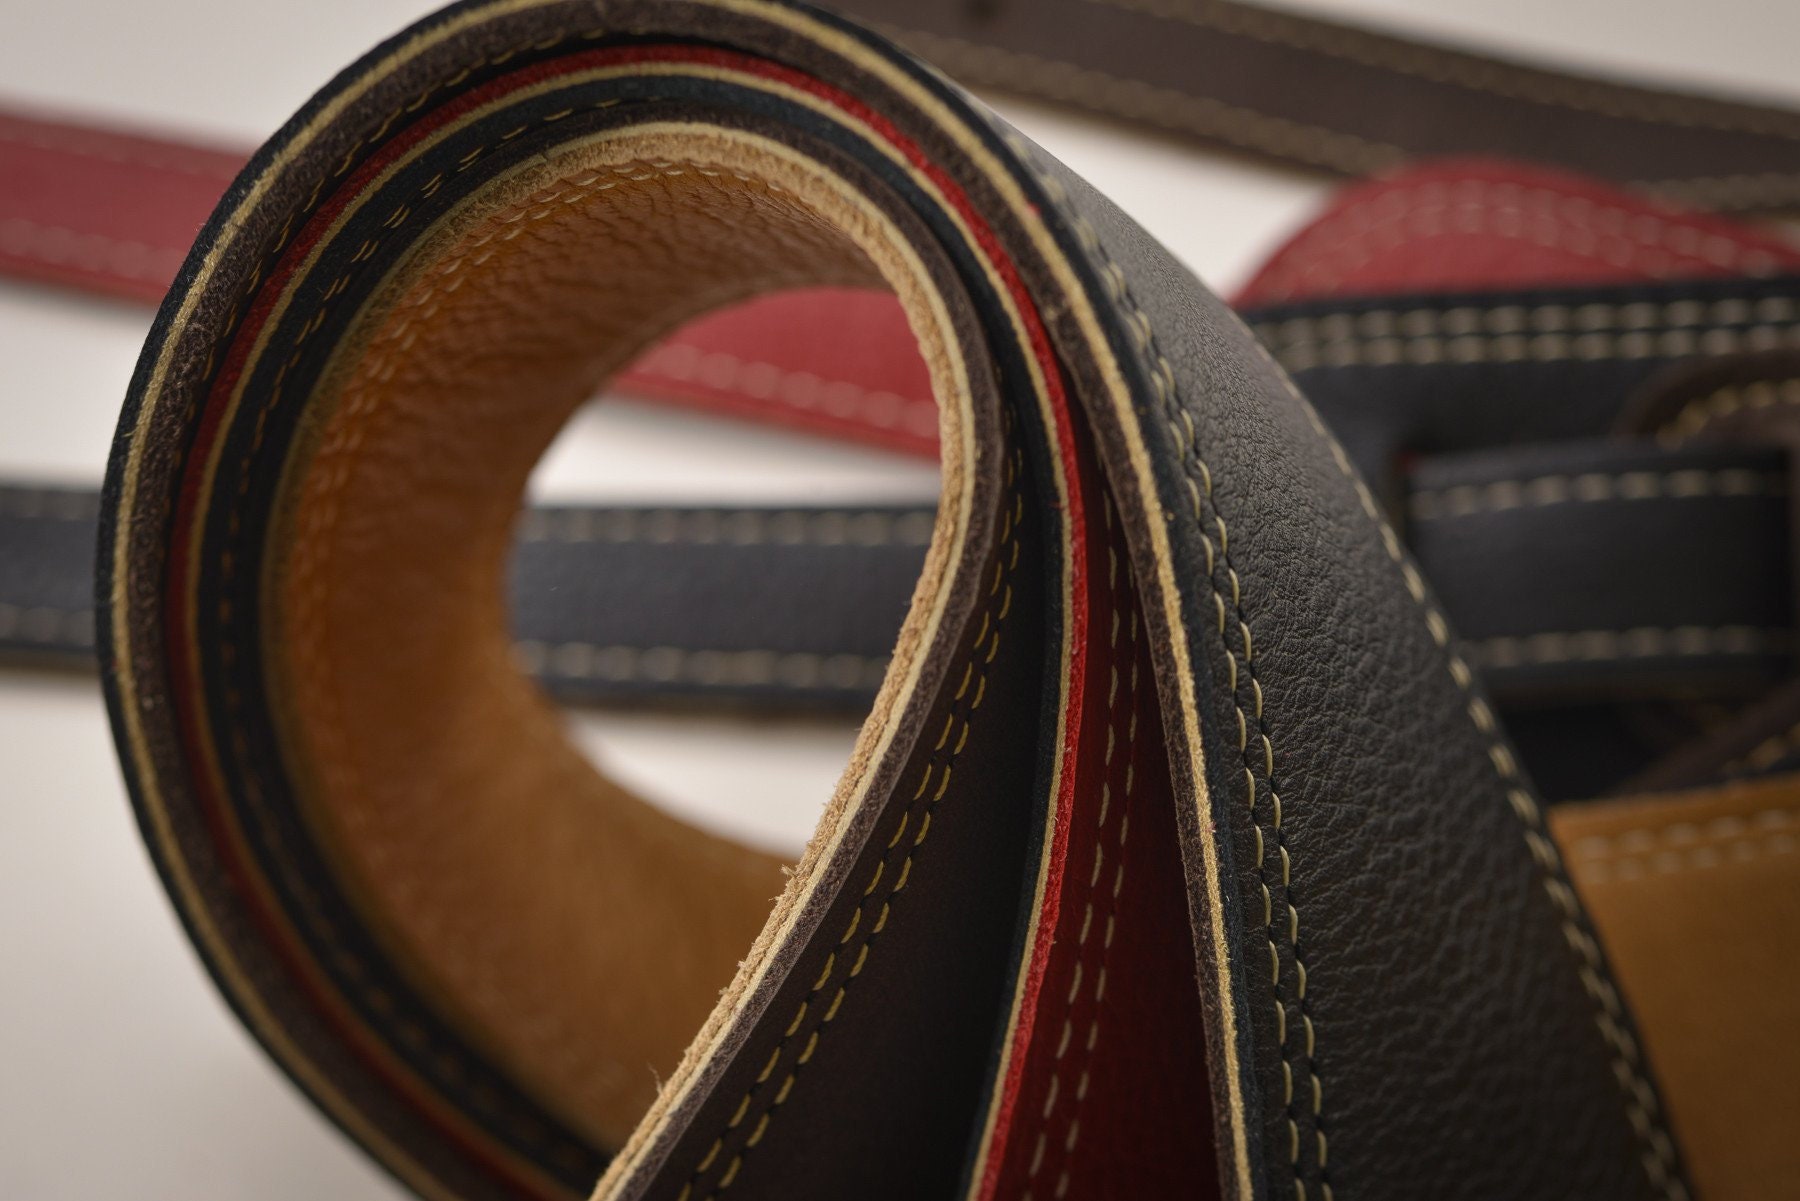 Reversible Guitar Strap 3-ply Glove Leather 